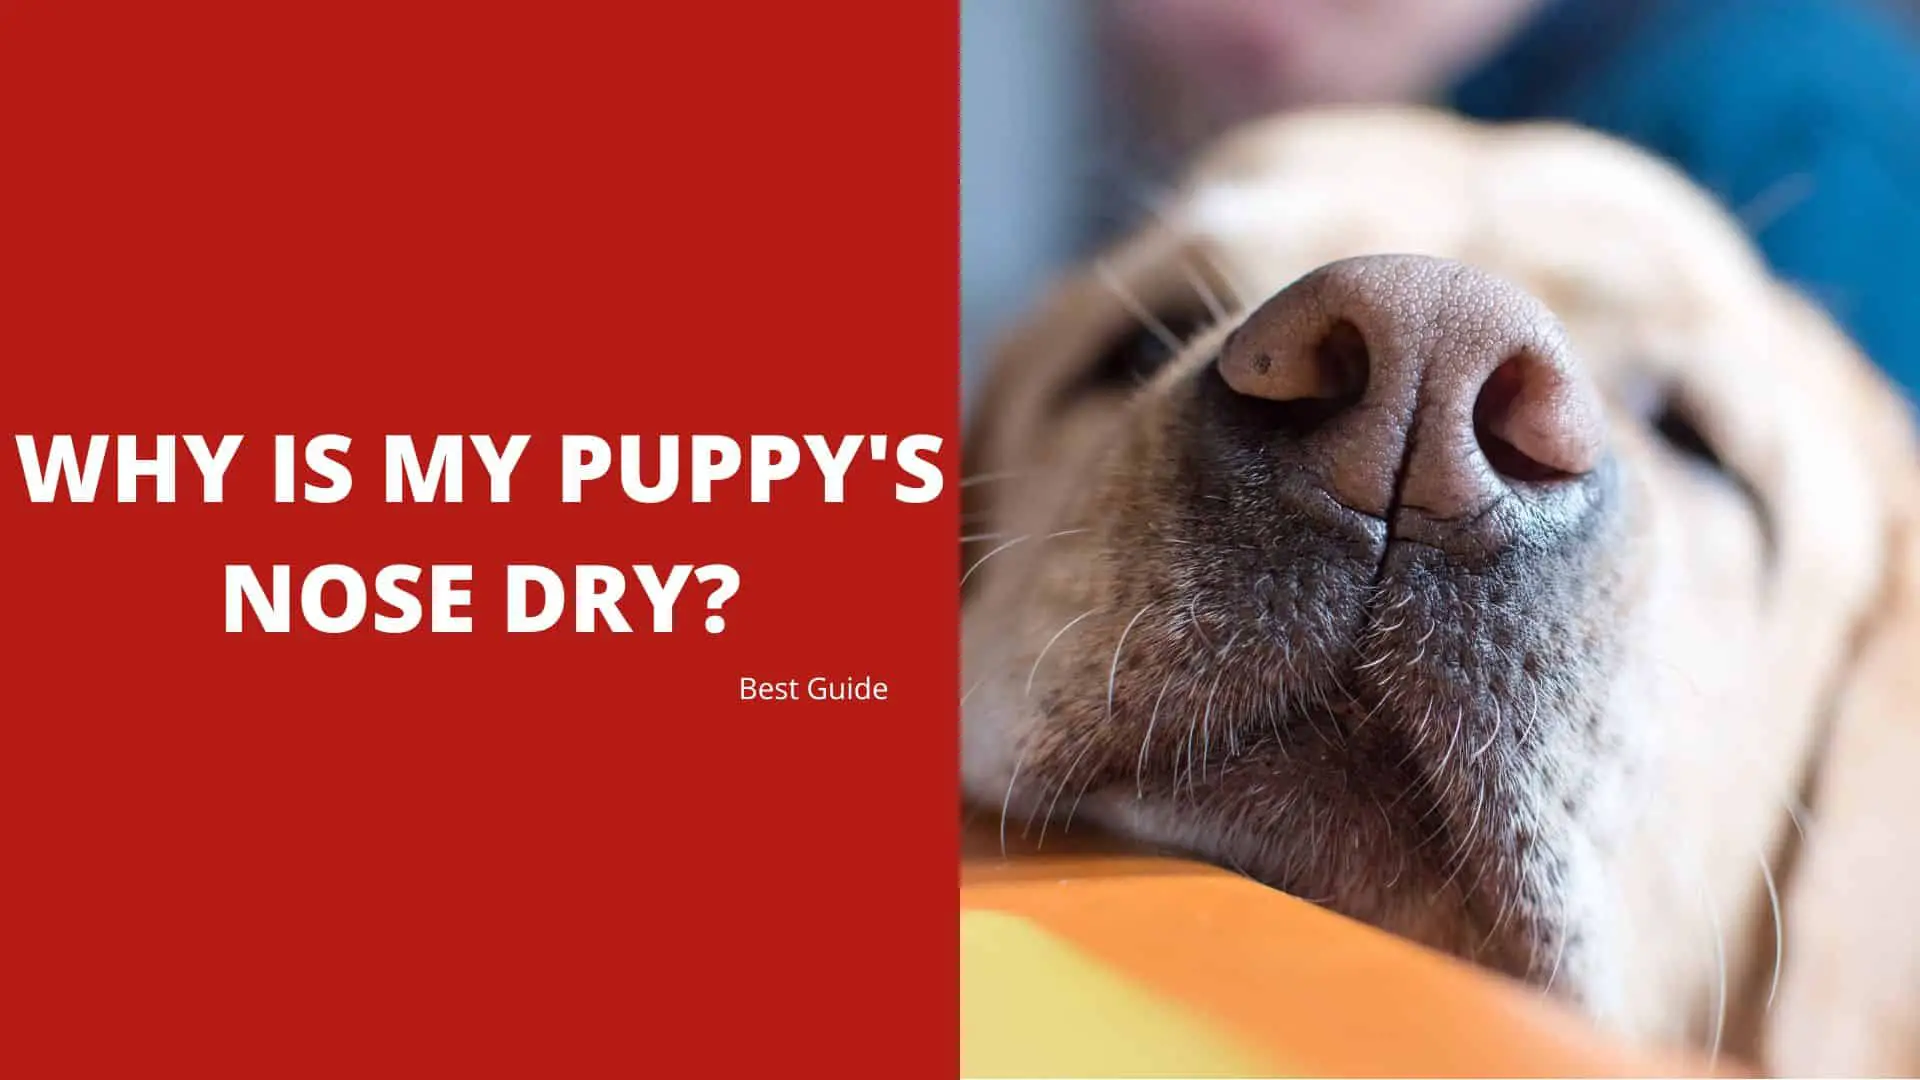 Why Is My Puppy’s Nose Dry? Best Guide